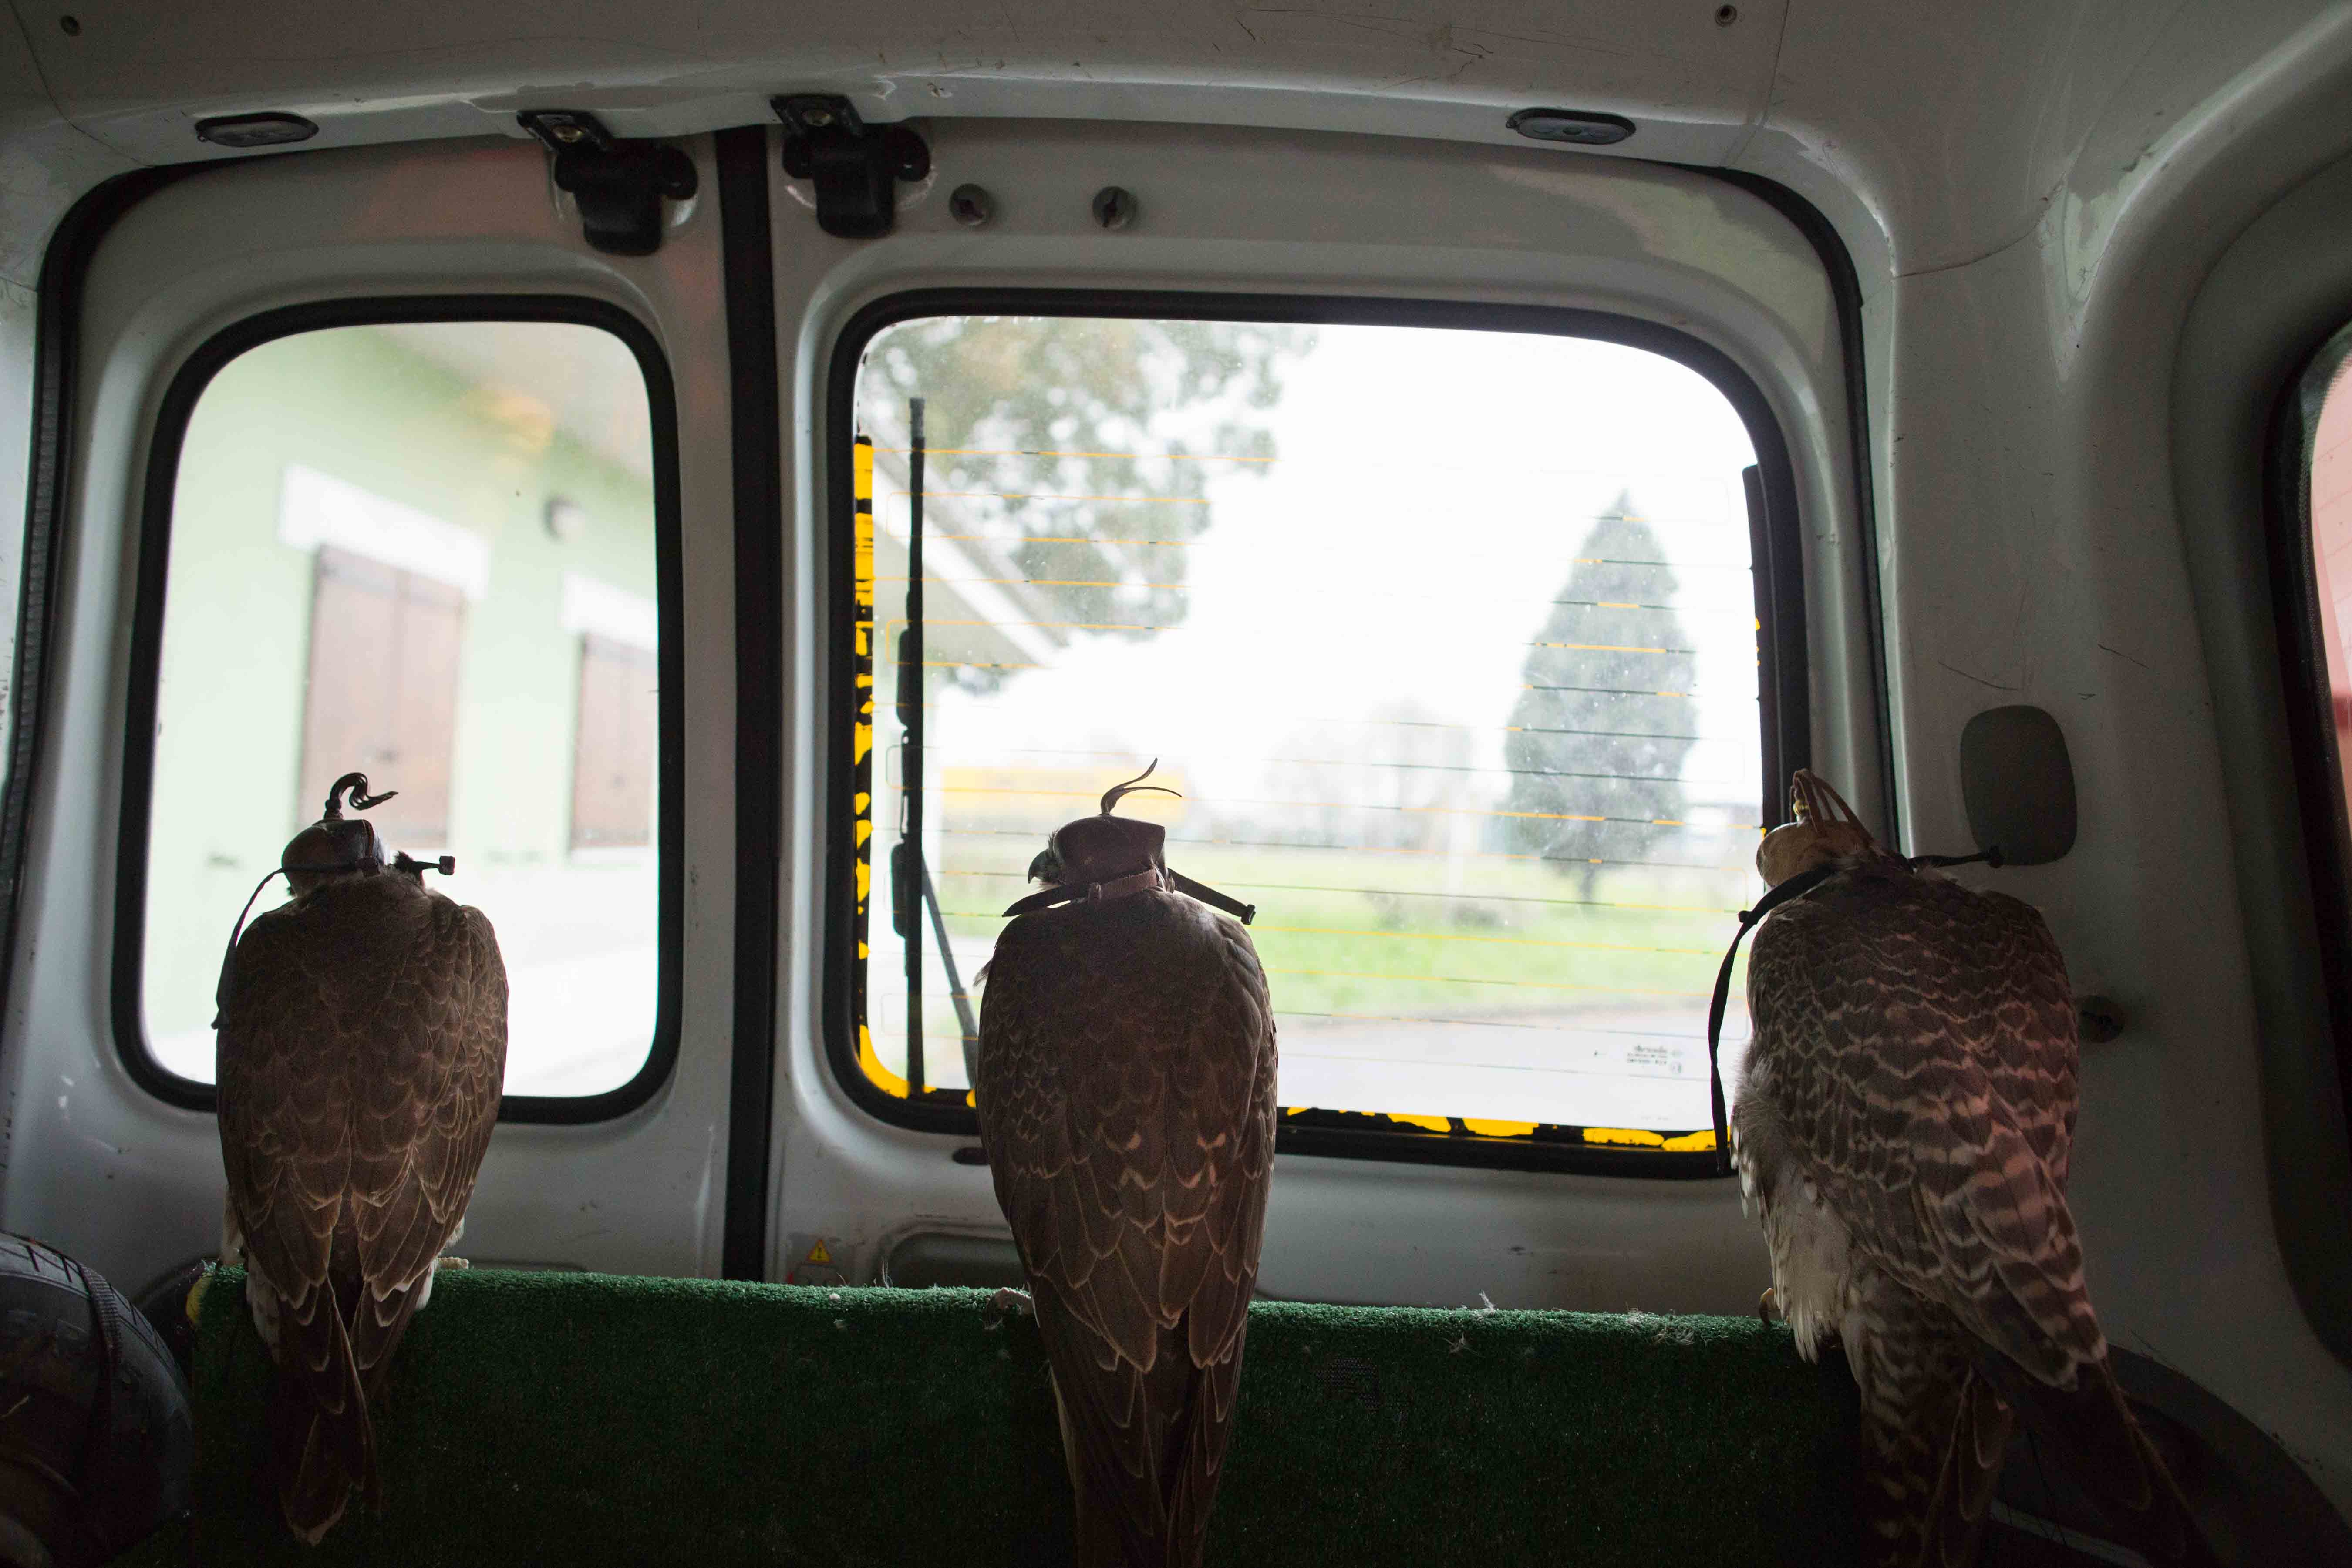 The falcons, together with the environmental technicians, travel in a van on their way to the track.